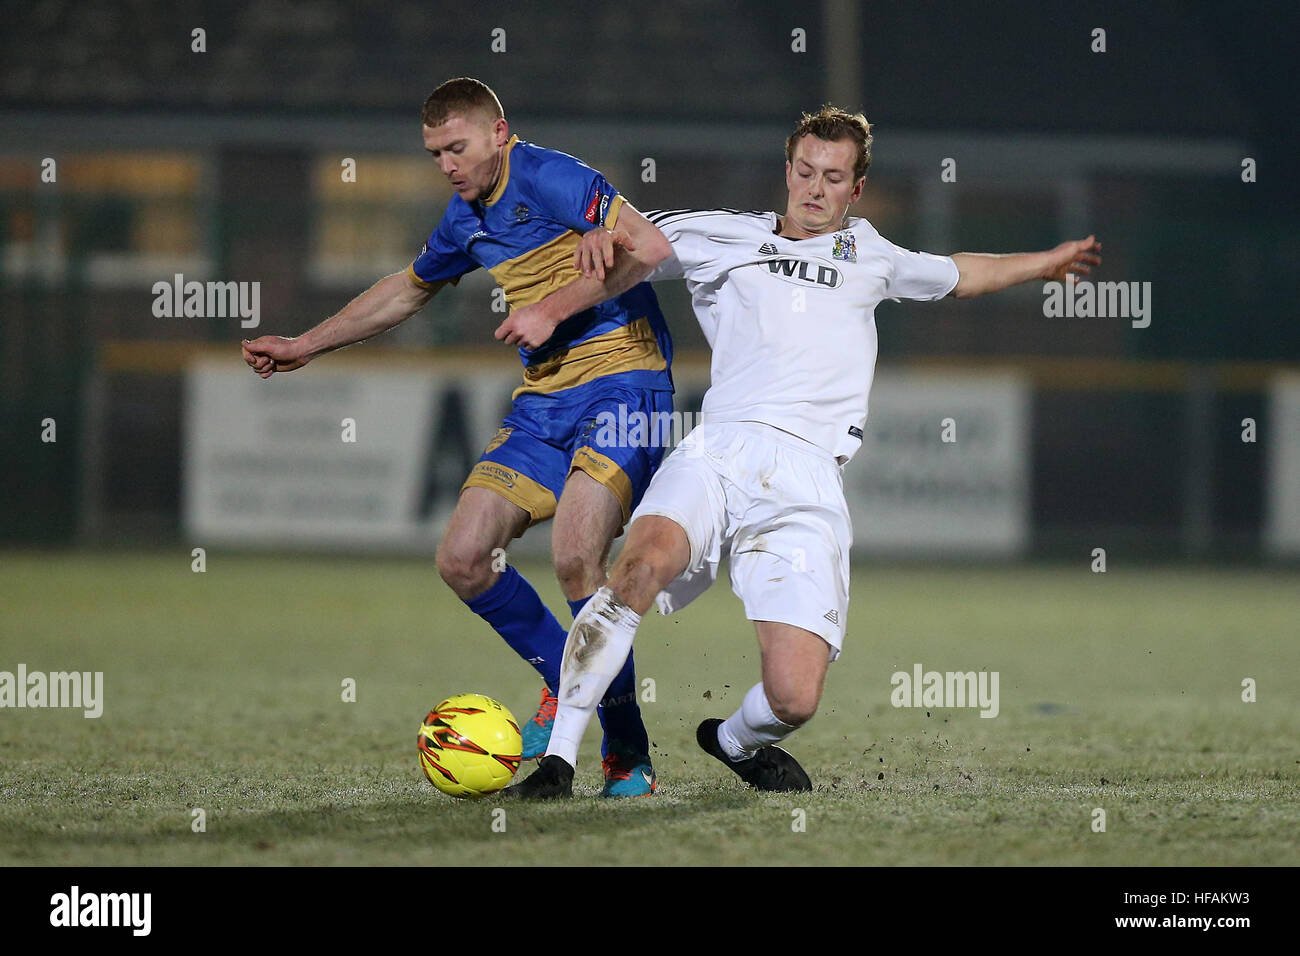 Danny Cossington of Romford and Ronnie Winn of Thurrock during Romford vs Thurrock, Ryman League Division 1 North Football at Ship Lane on 28th Decemb Stock Photo